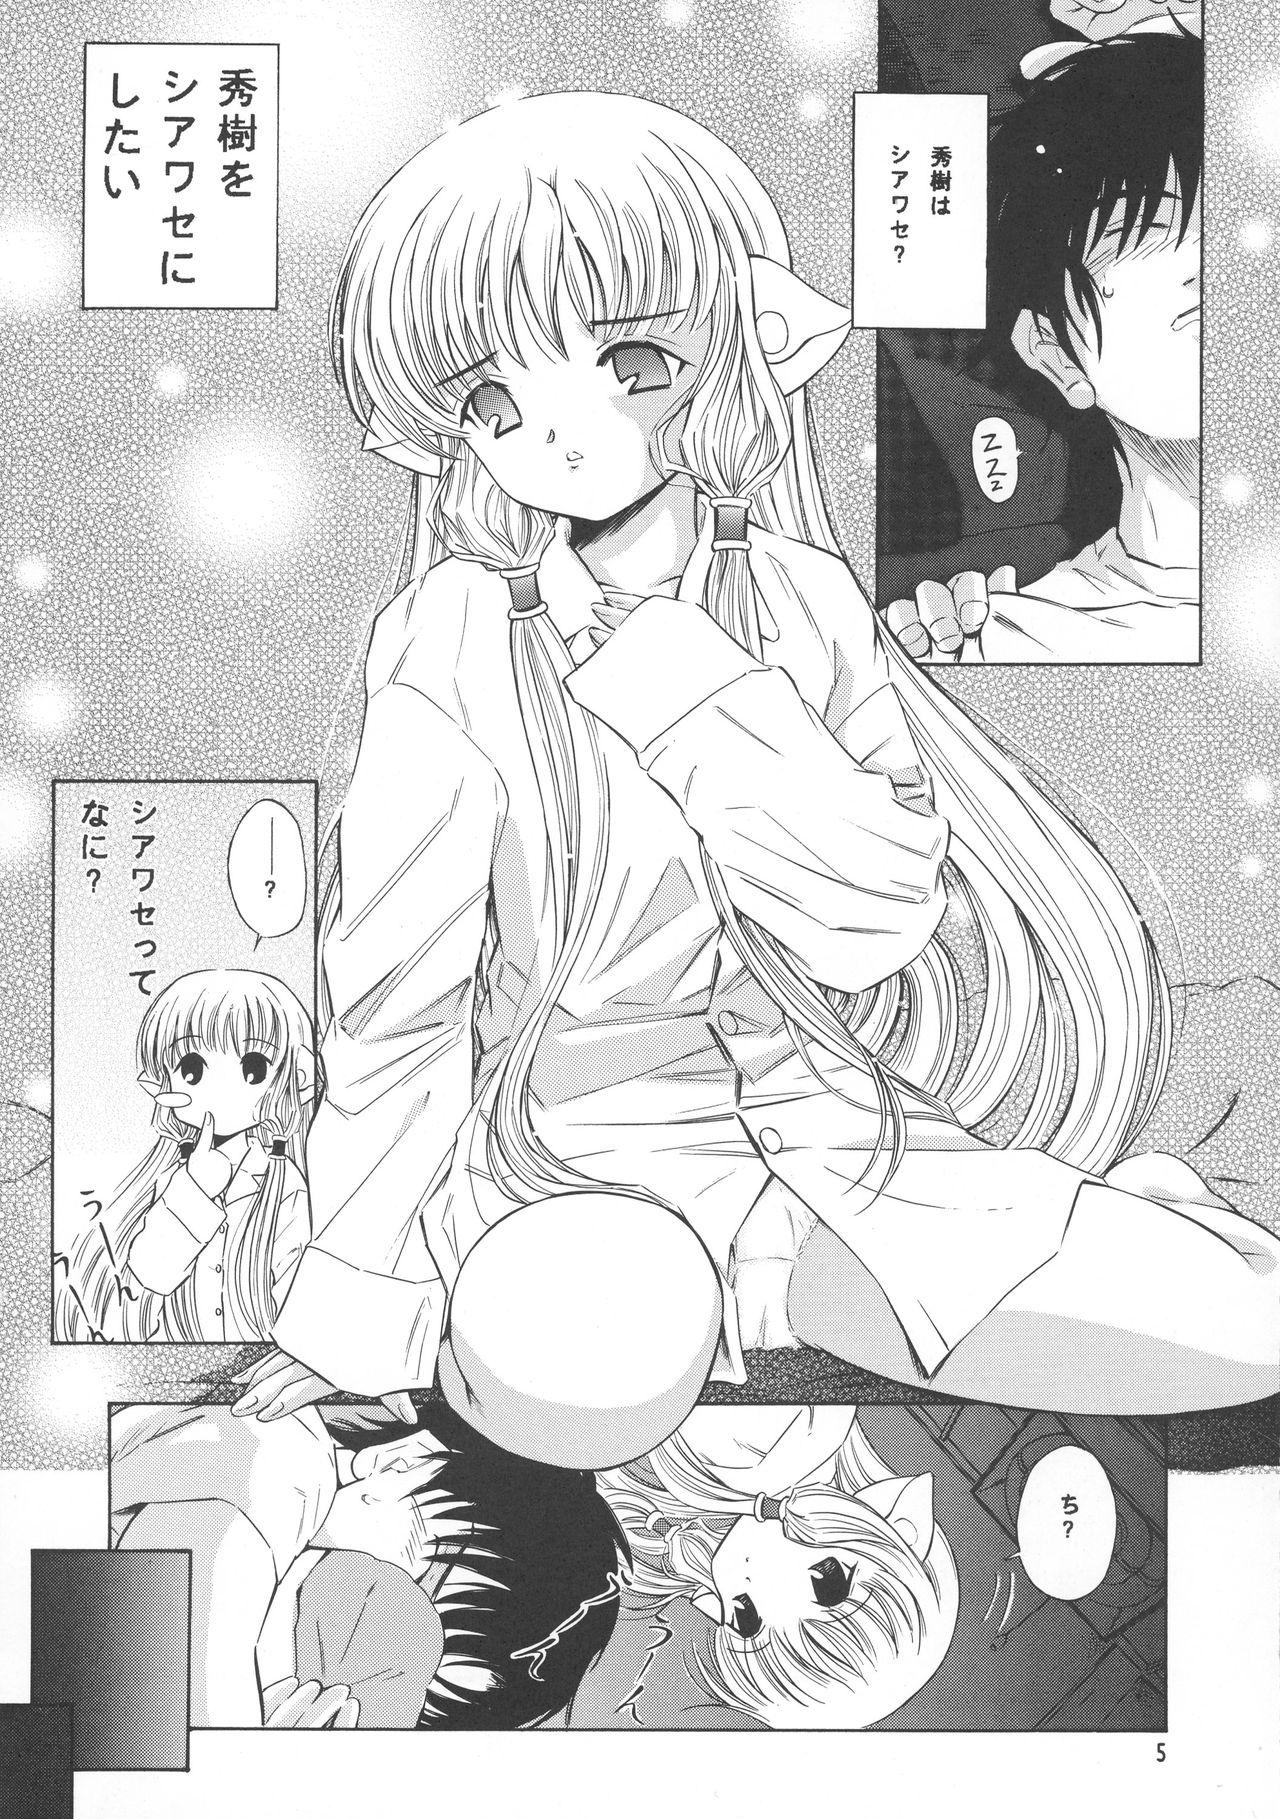 Free Fucking Tricolor - Cardcaptor sakura Chobits Angelic layer Lolicon - Page 5